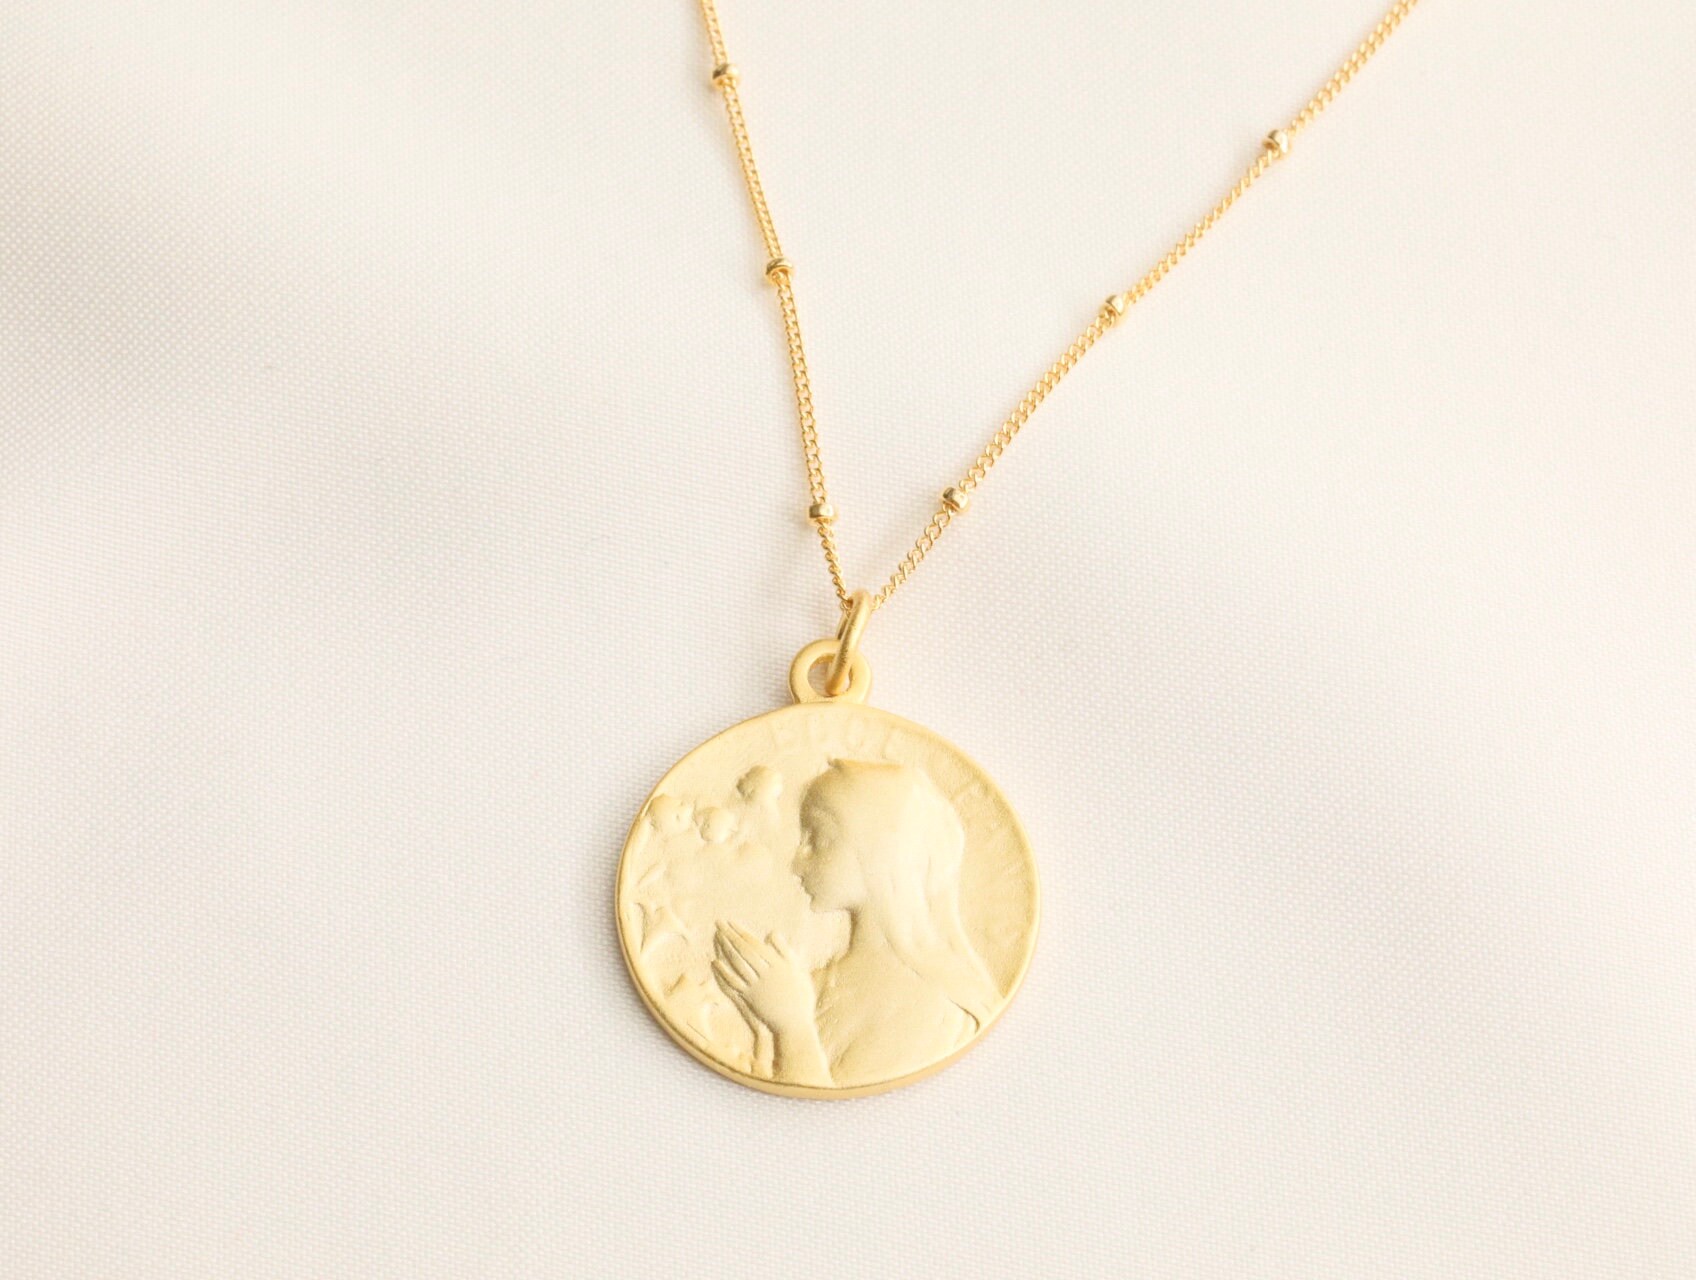 Guadalupe Dame Maria Necklace  Coin Necklace  Religious Jewelry  Miraculous Necklace   Pray Necklace  Medallion Necklace  Matte Finish